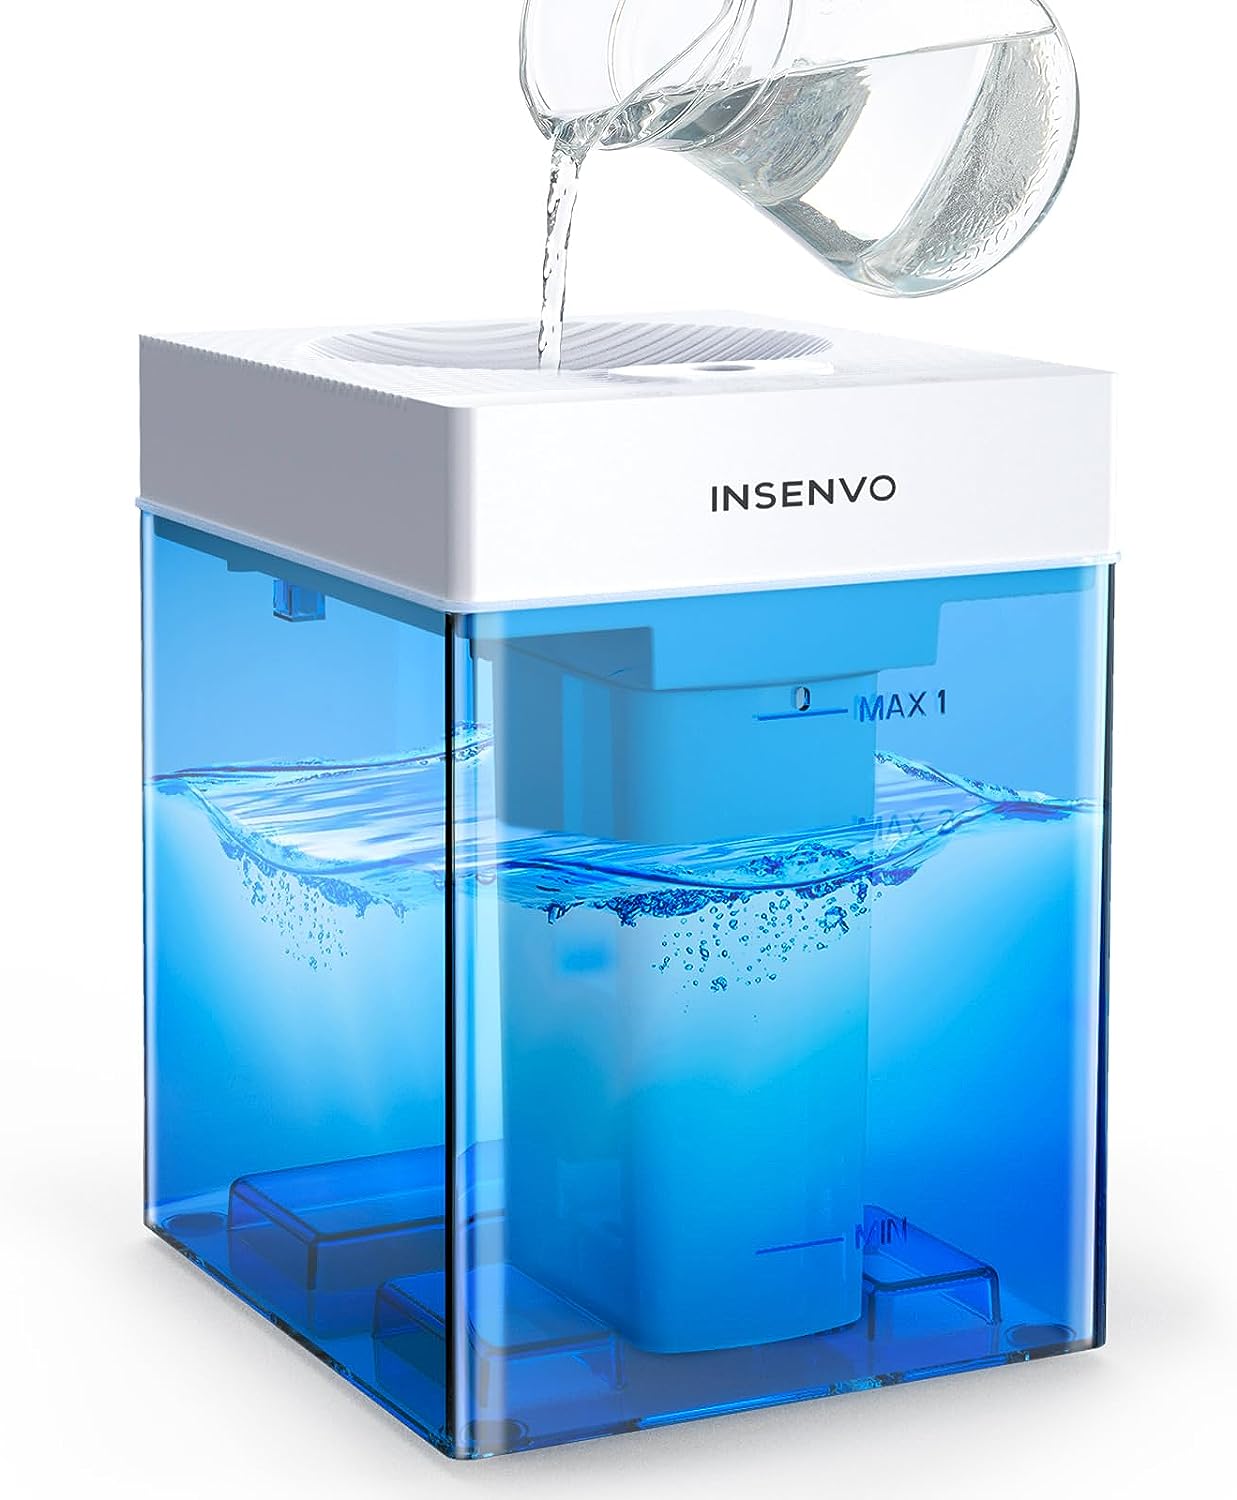 INSENVO Humidifier for Bedroom, 3L Top Fill Cool Mist [...]